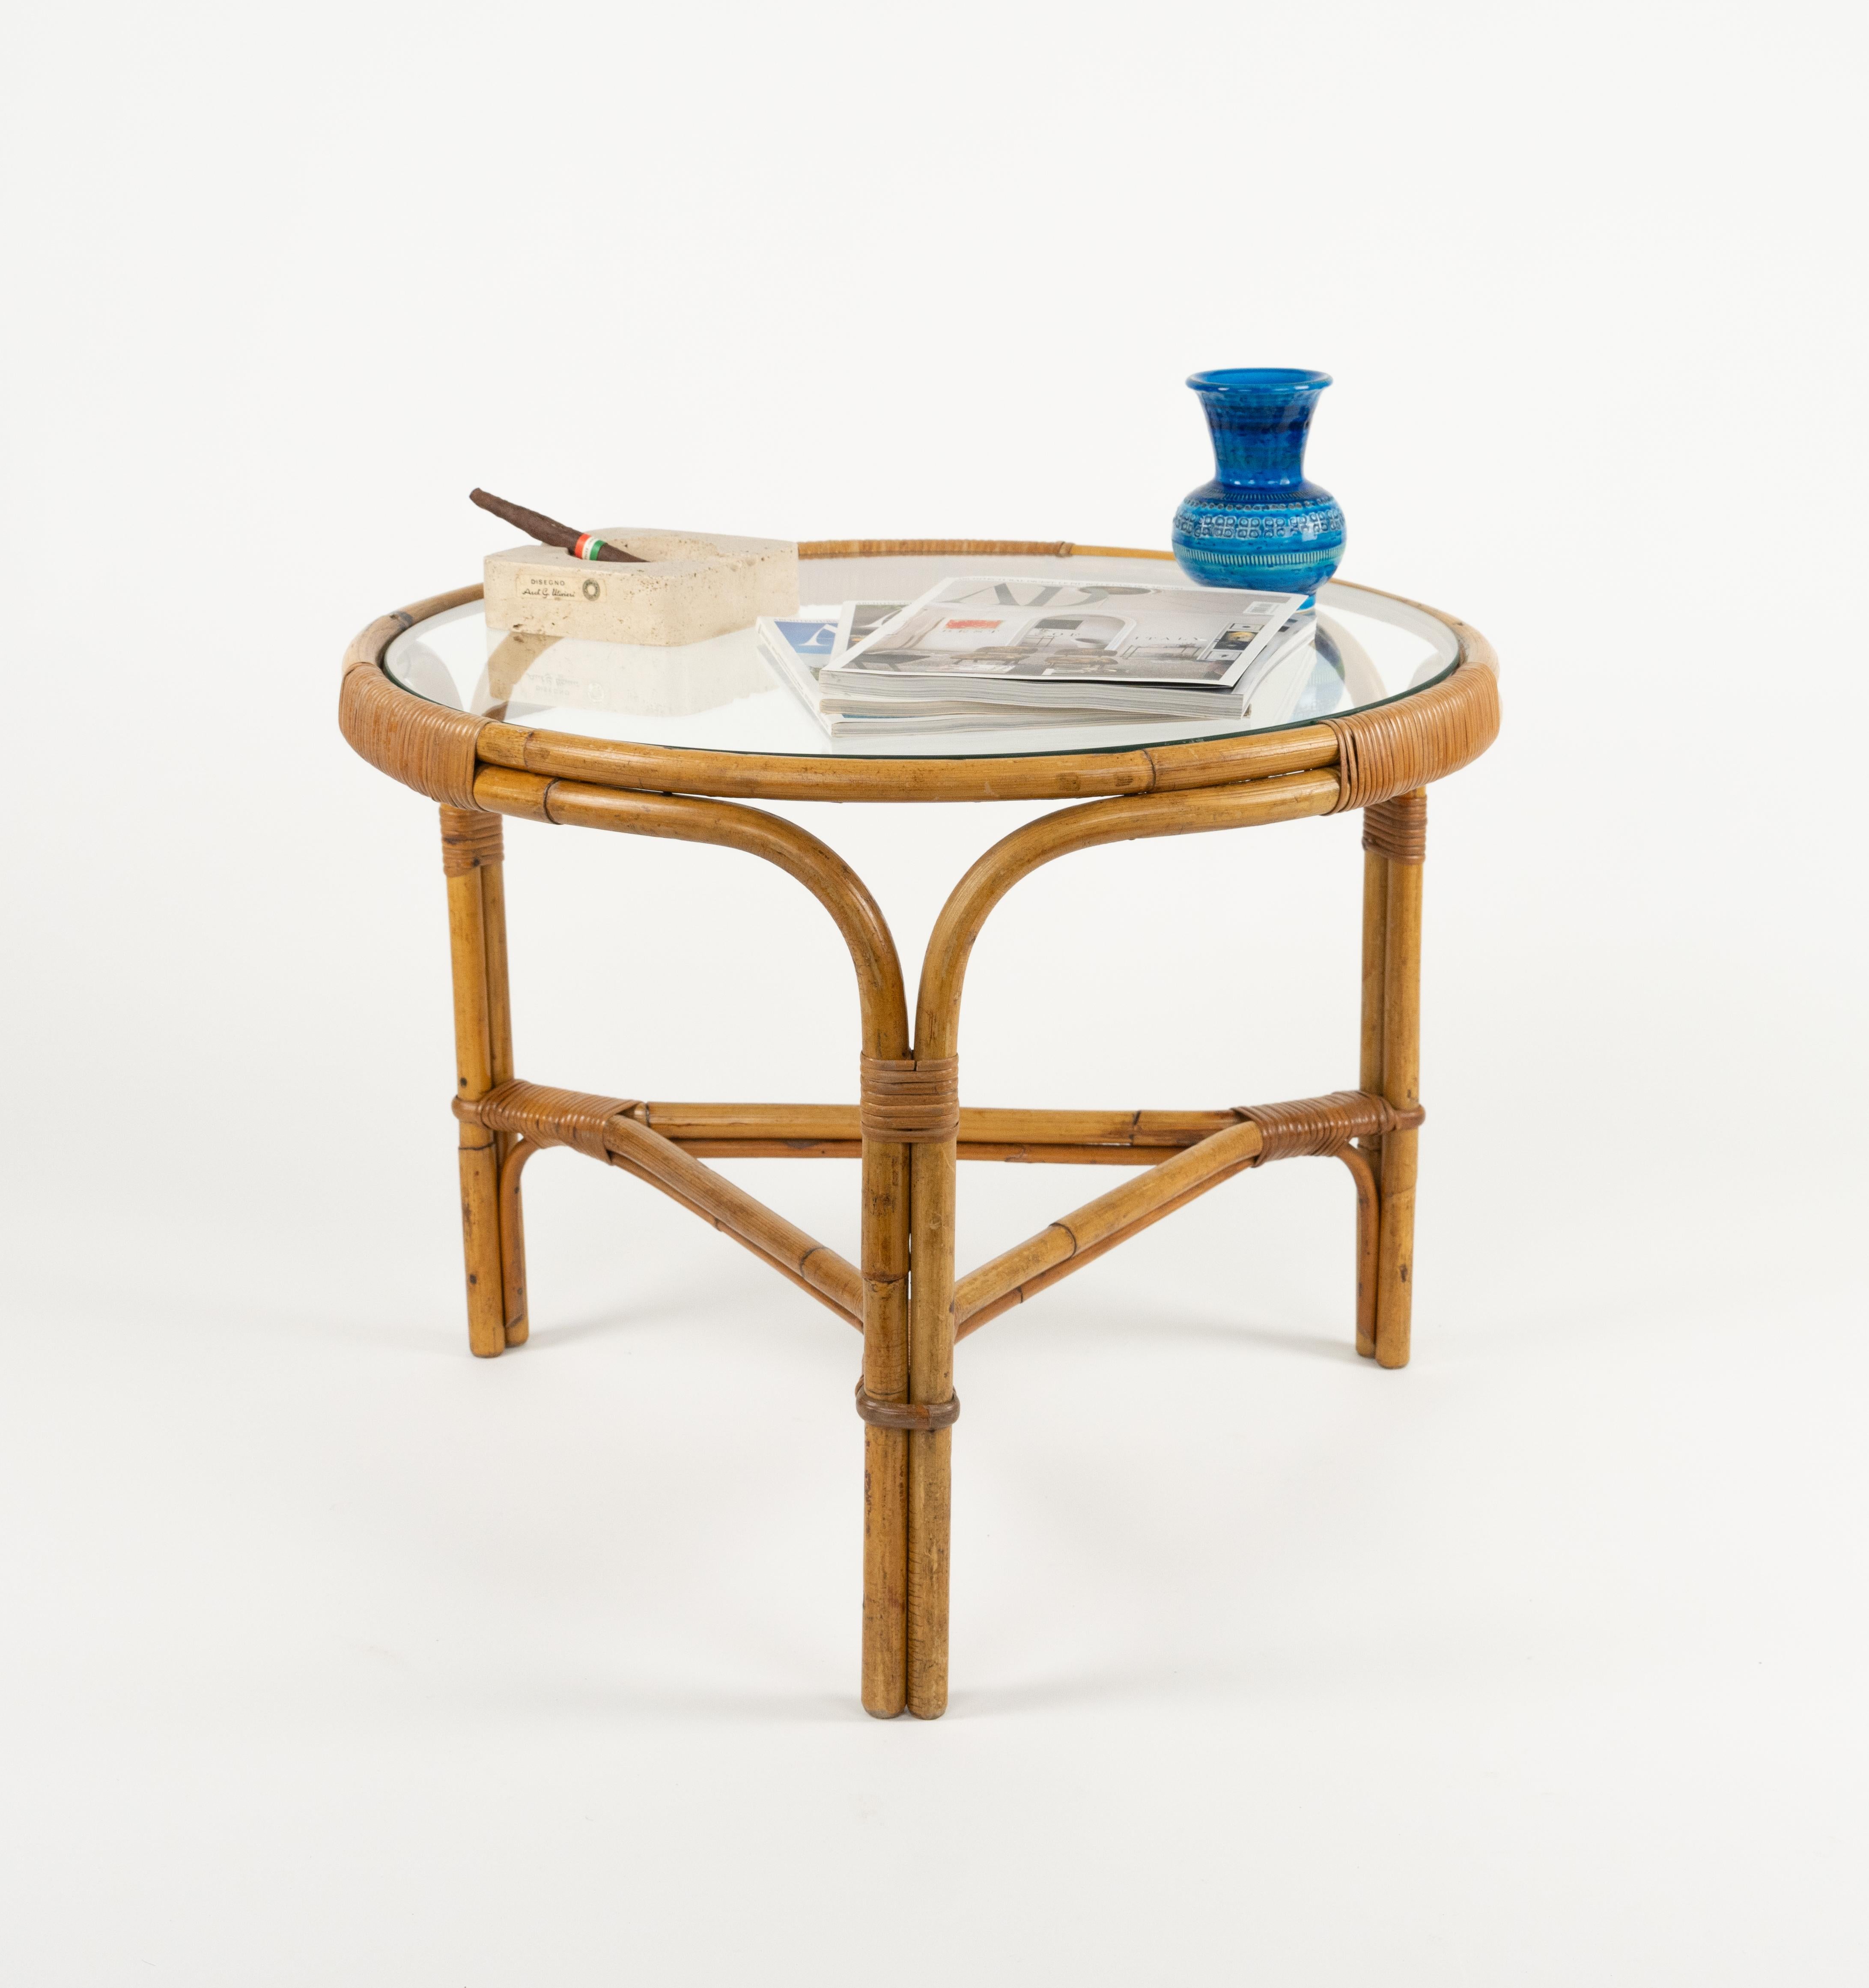 Midcentury Round Coffee Table in Bamboo, Rattan and Glass, Italy 1960s For Sale 2